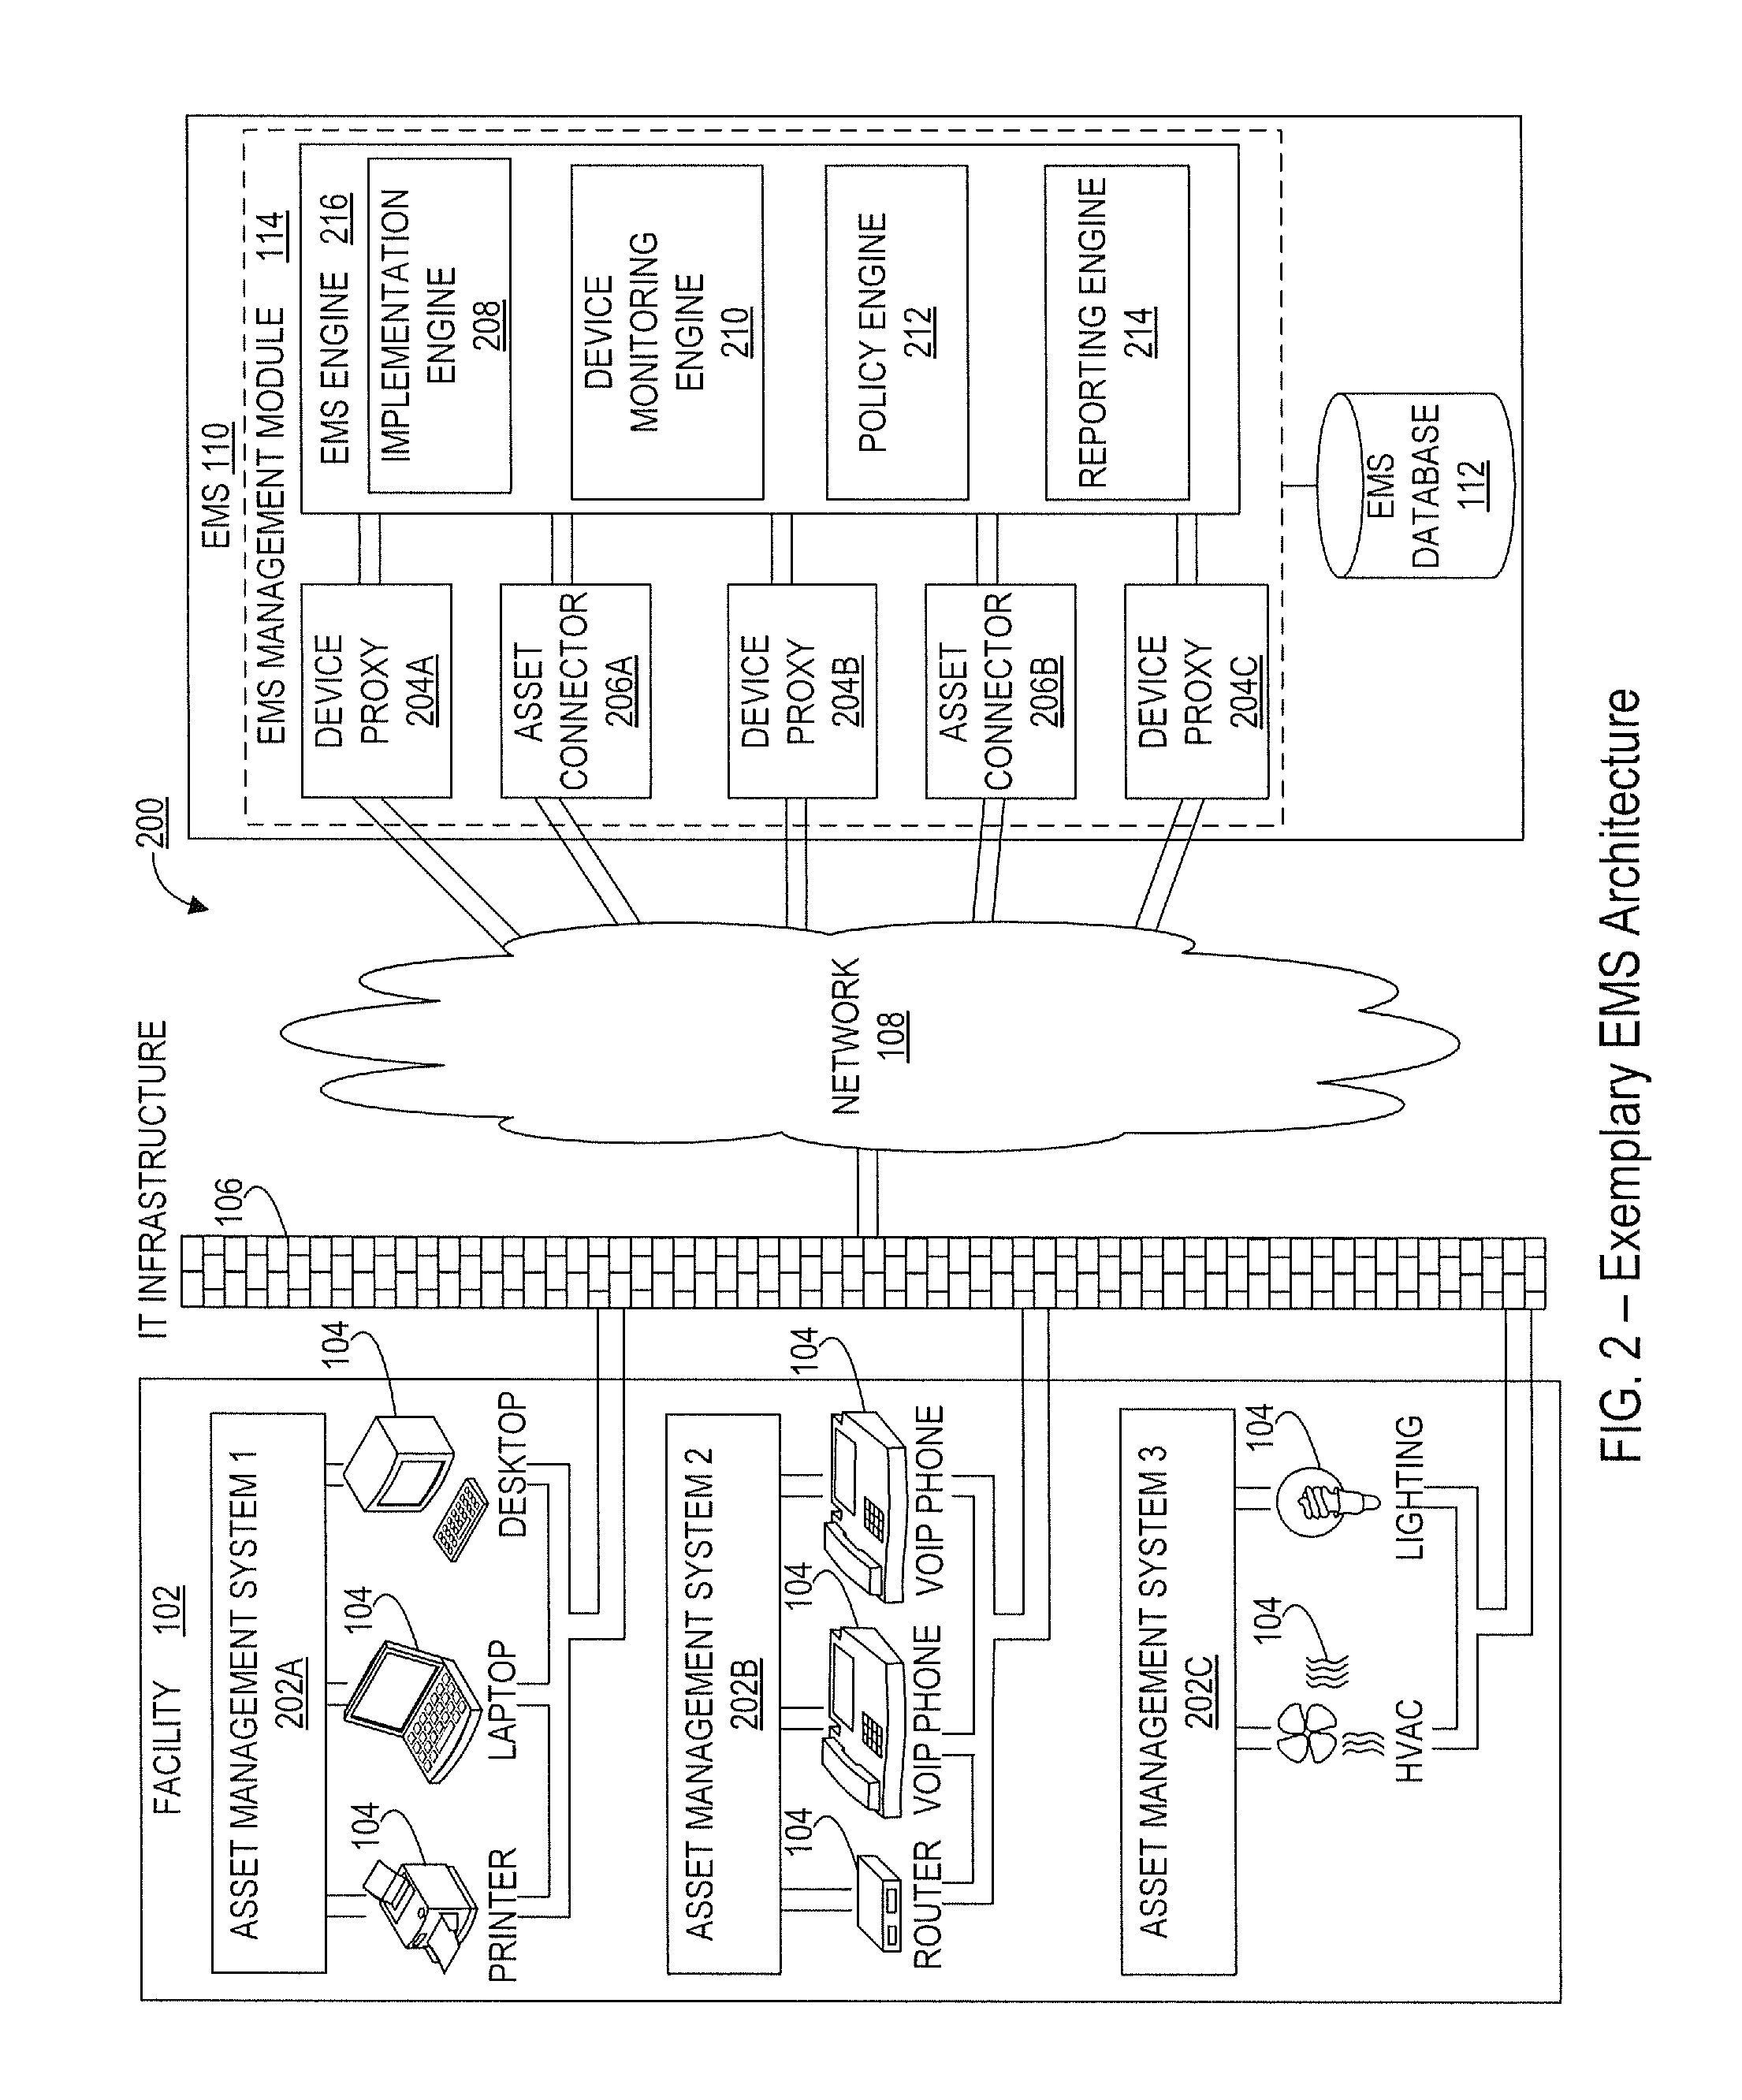 System and methods for automatic power management of remote electronic devices using a mobile device